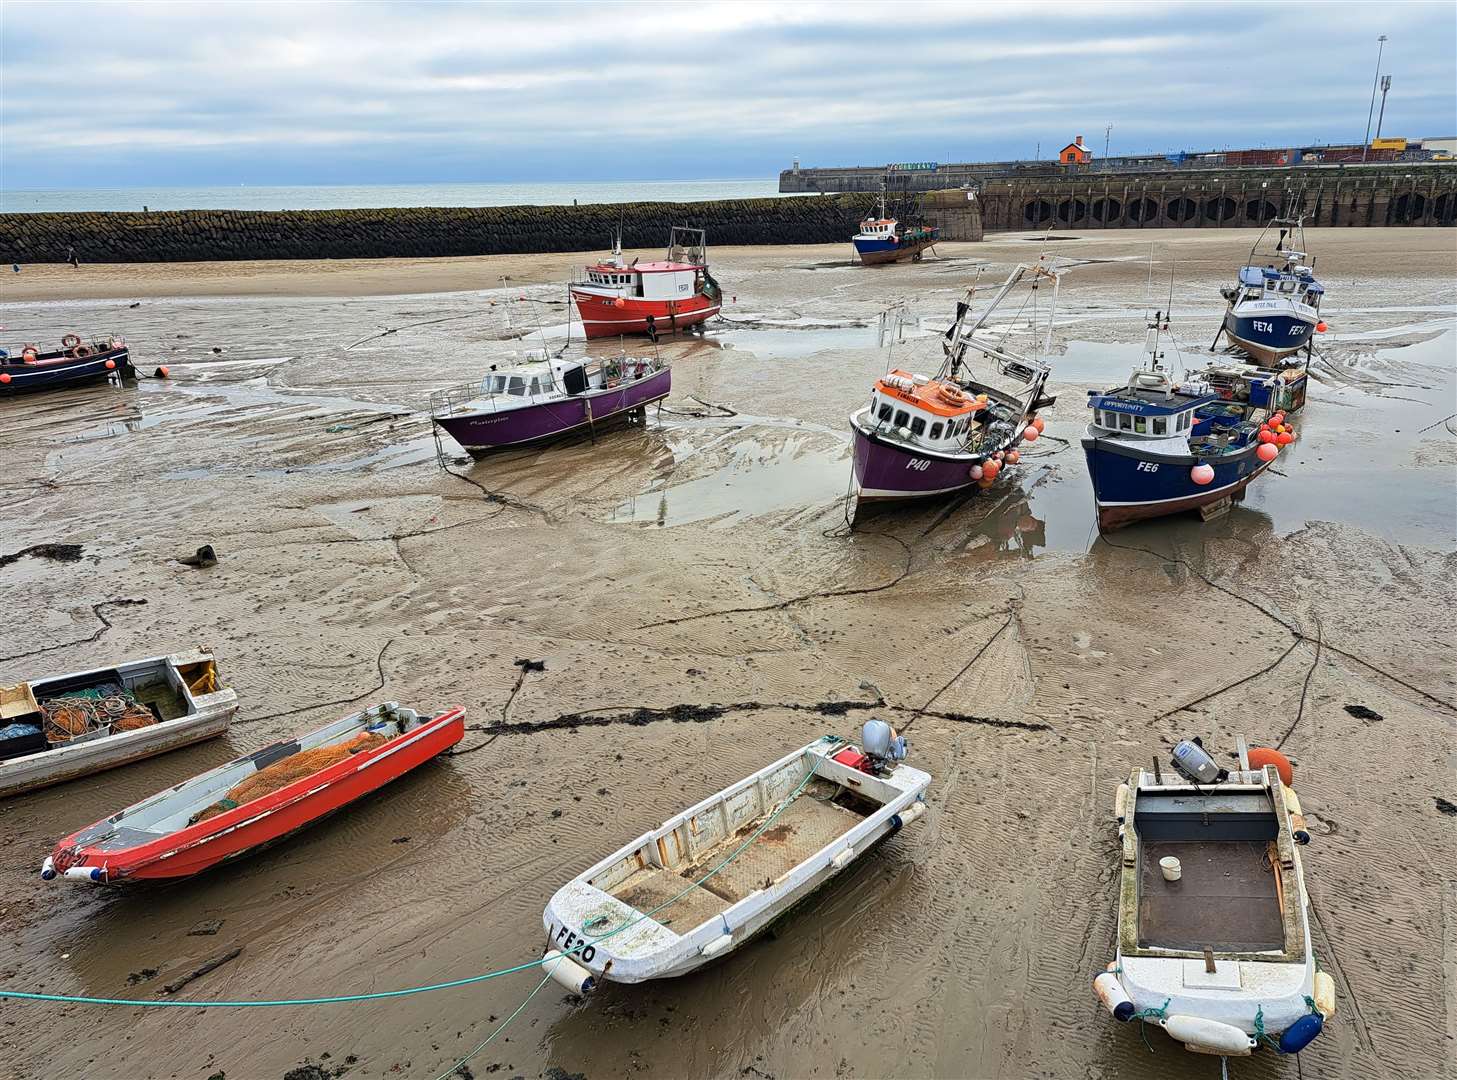 The mud at the harbour can be dangerous at low tide